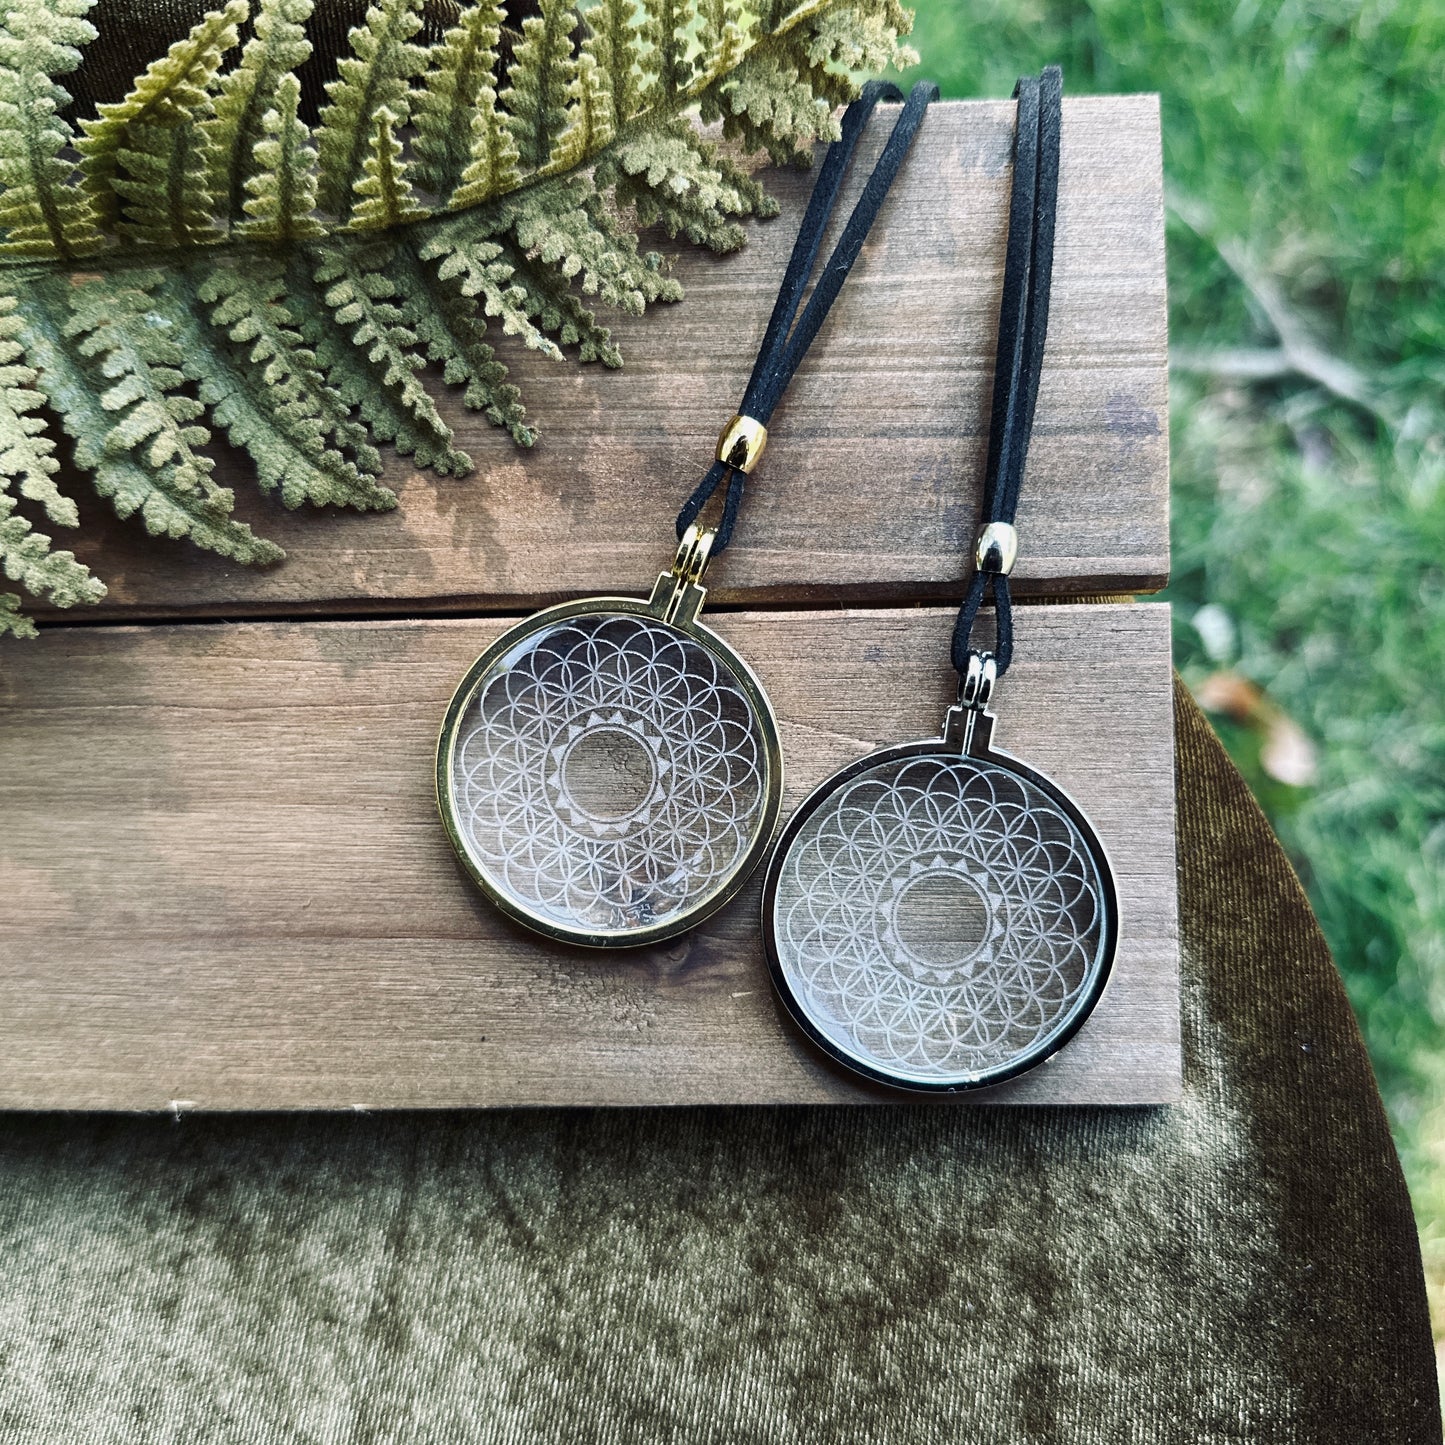 Flower of Life Necklace, Solar Lighter, Magnifying Glass Necklace, Sustainable Jewelry, Cannabis Accessory